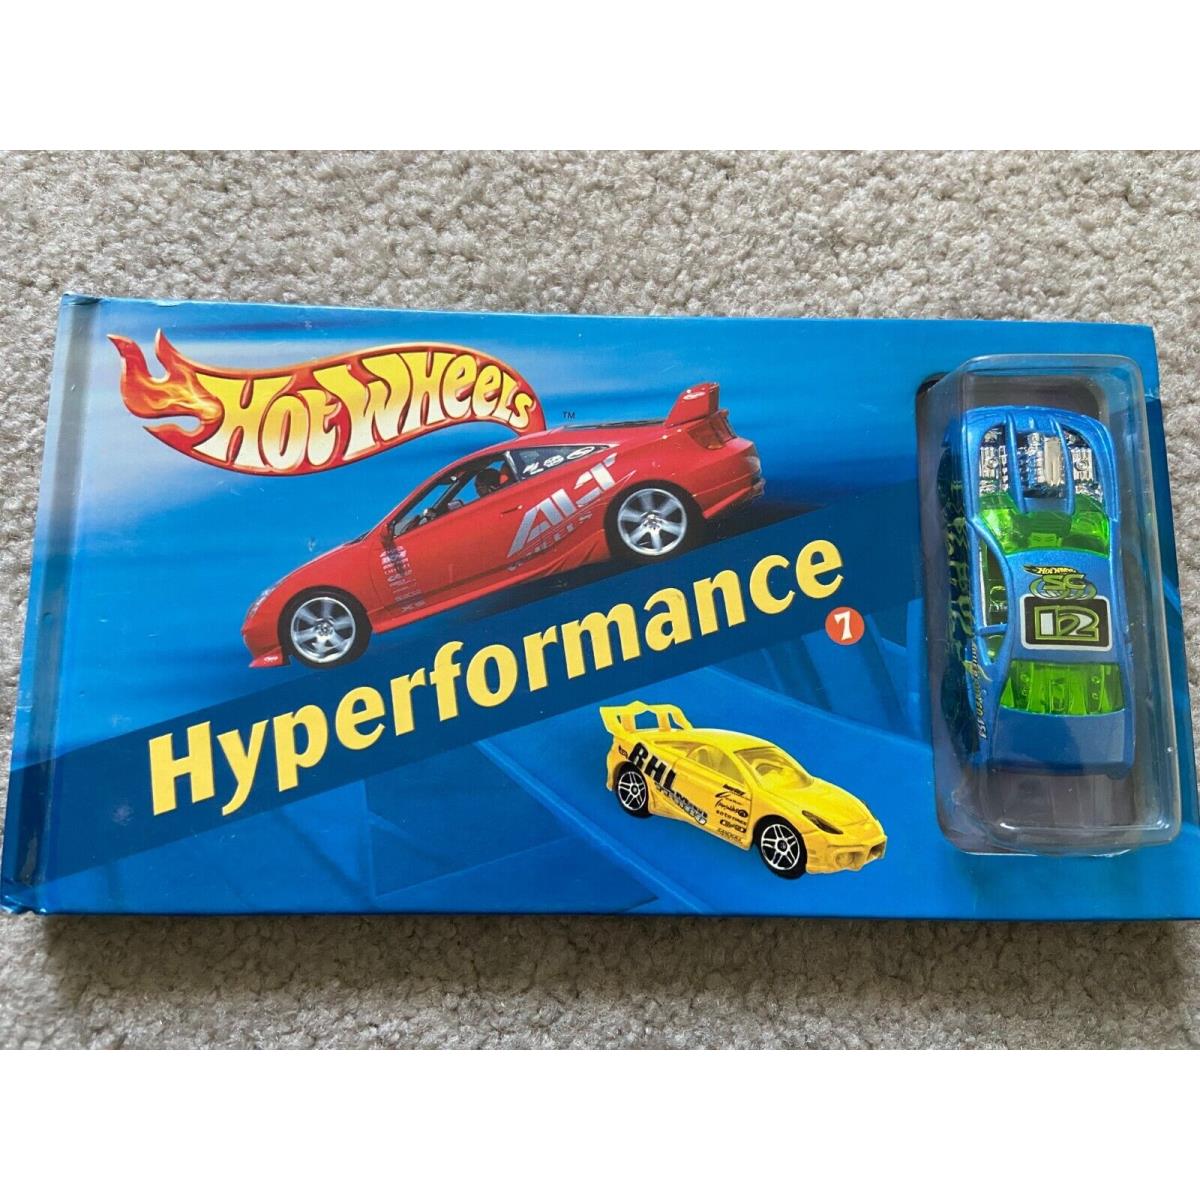 Hot Wheels Hyperformance Book and Car - Plastic Blister